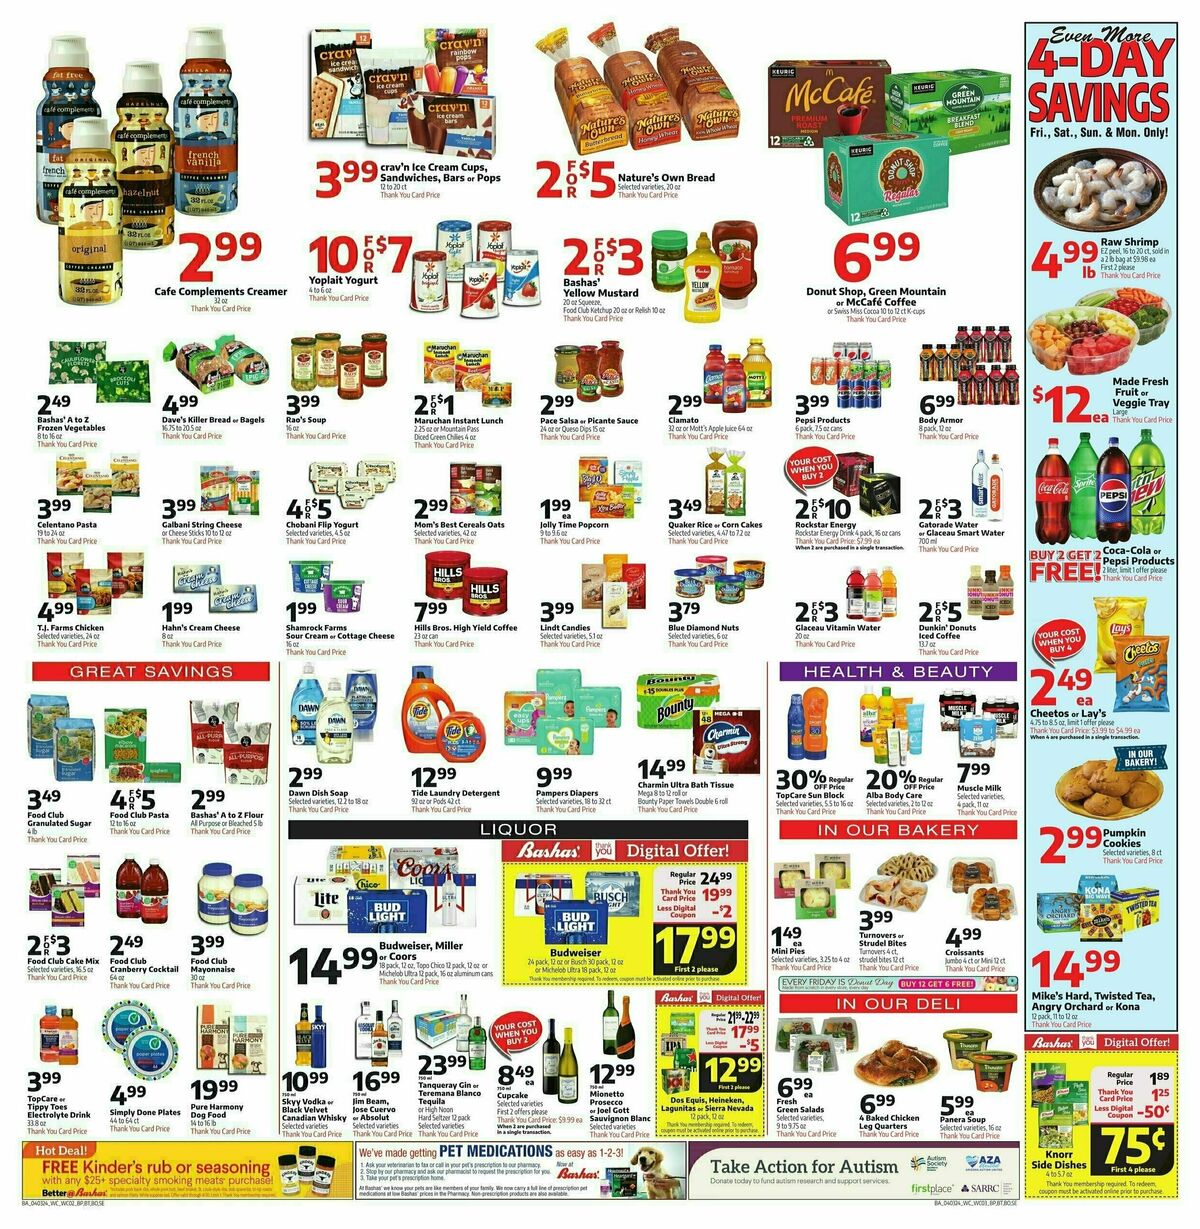 Bashas Weekly Ad from April 3